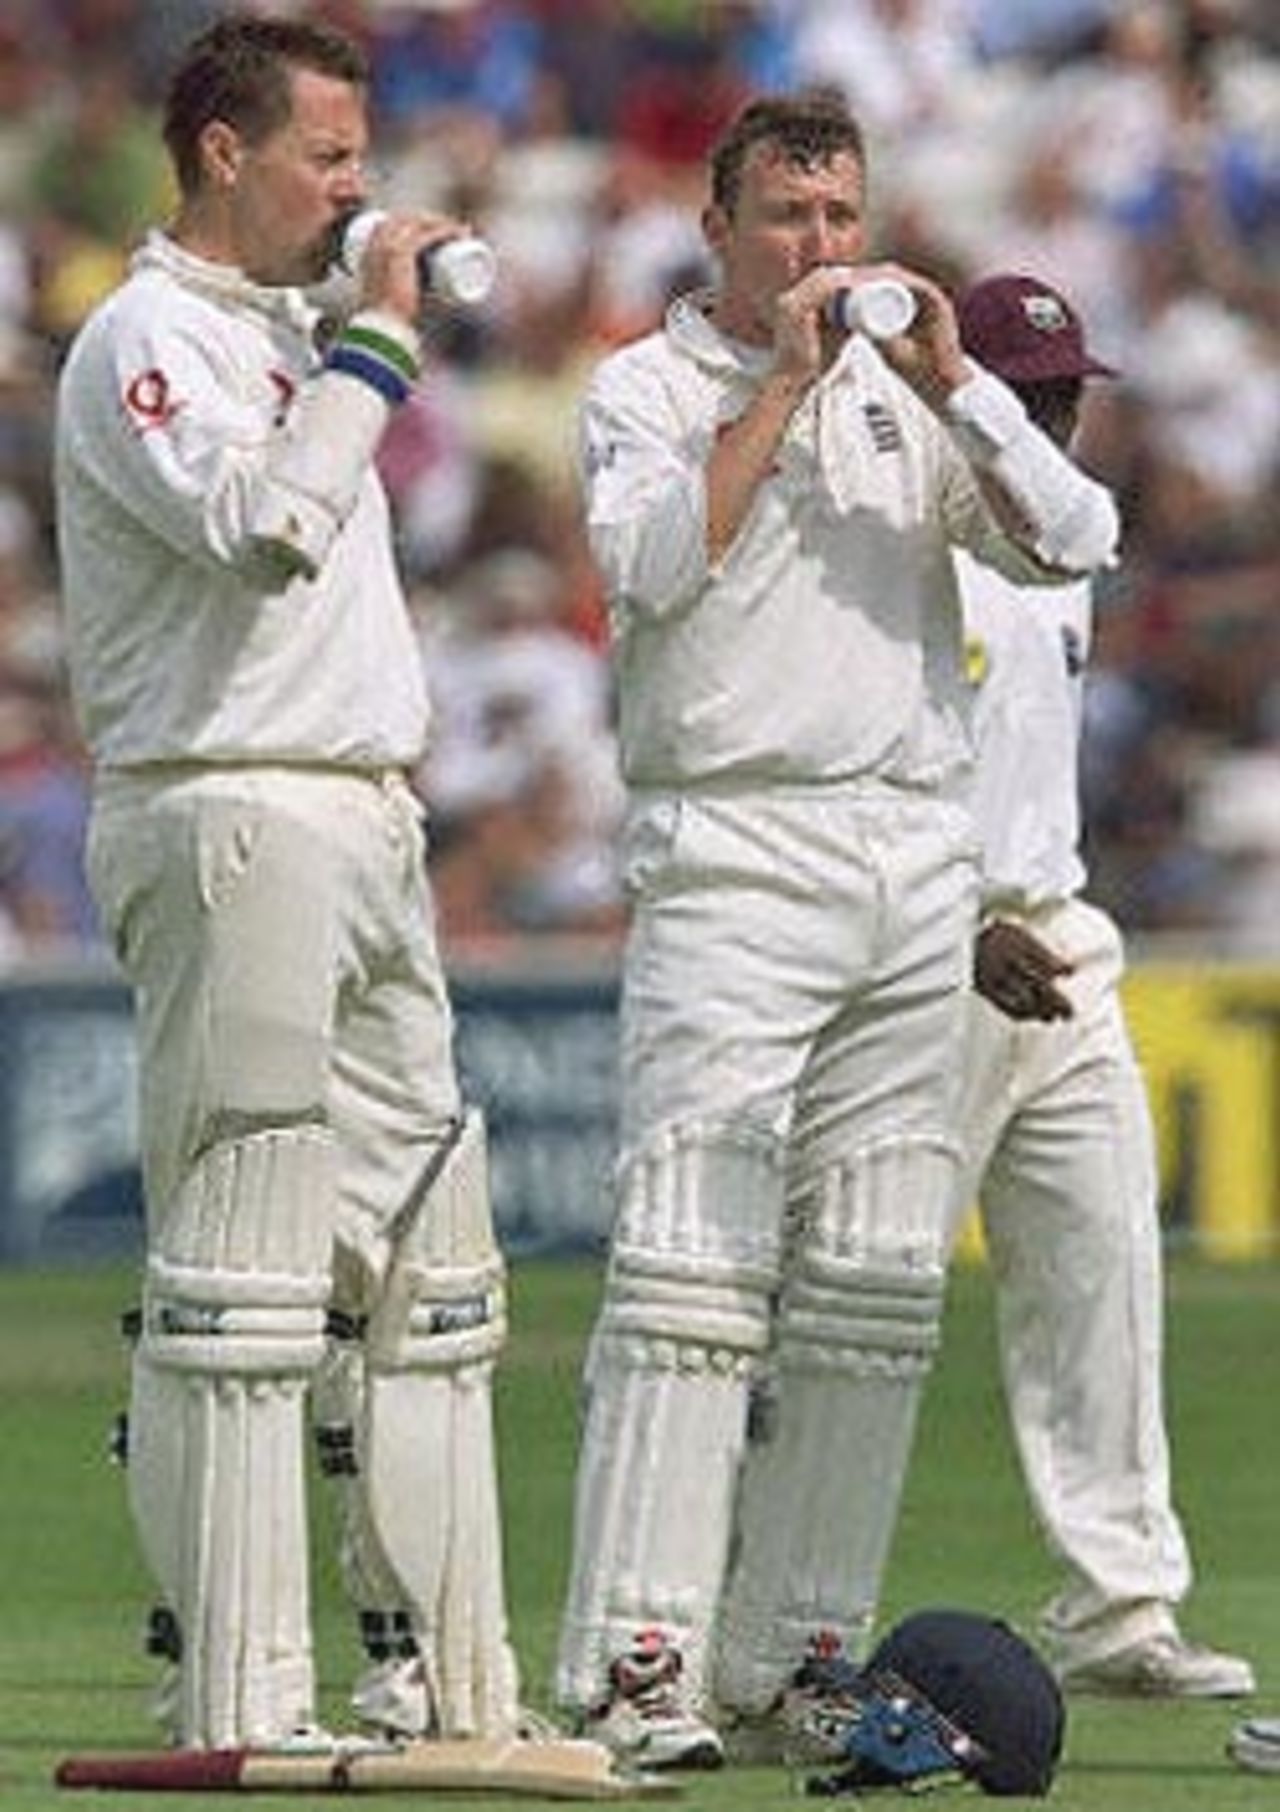 England's opening batsmen Marcus Trescothick (L) and Michael Atherton (R), take a water break during the first session of the Fifth Test against The West Indies at The Oval in London. England tour Pakistan later in the year and will have to leave the field for refreshements because of Ramadan. The Wisden Trophy, 2000, 5th Test, England v West Indies, Kennington Oval, London, 31Aug-04Sep 2000 (Day 1)